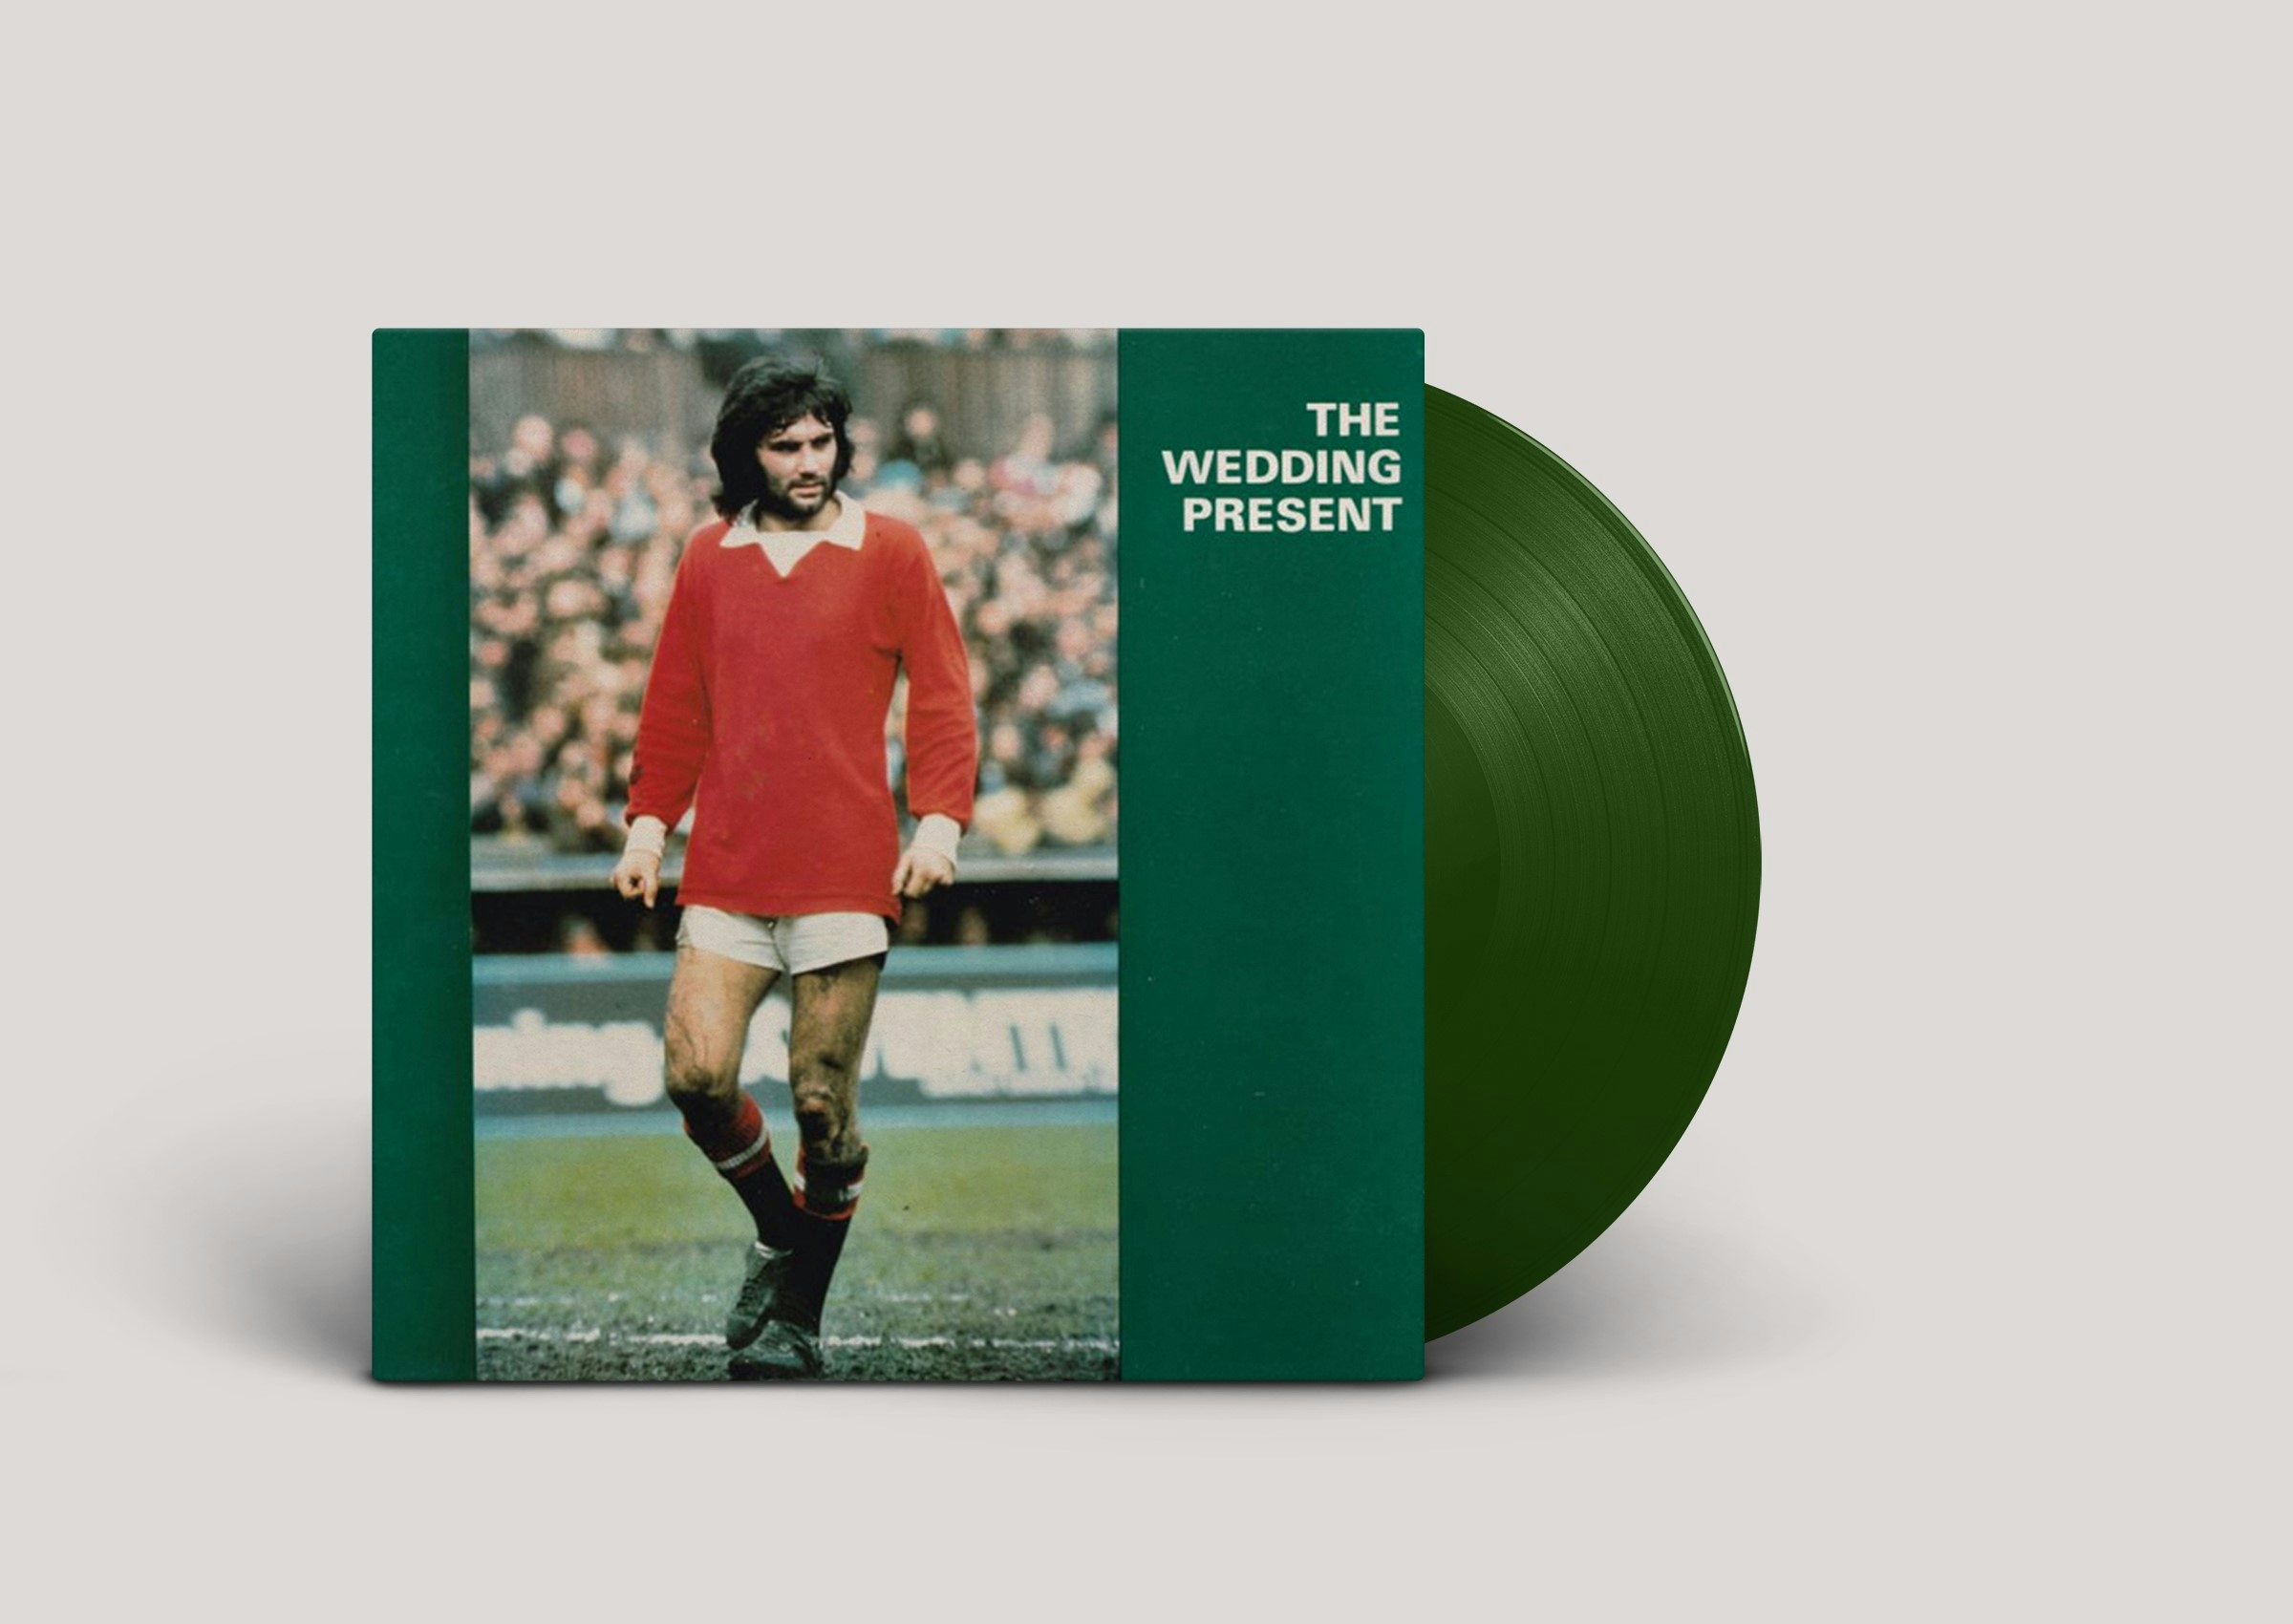 Album artwork for Album artwork for George Best by The Wedding Present by George Best - The Wedding Present